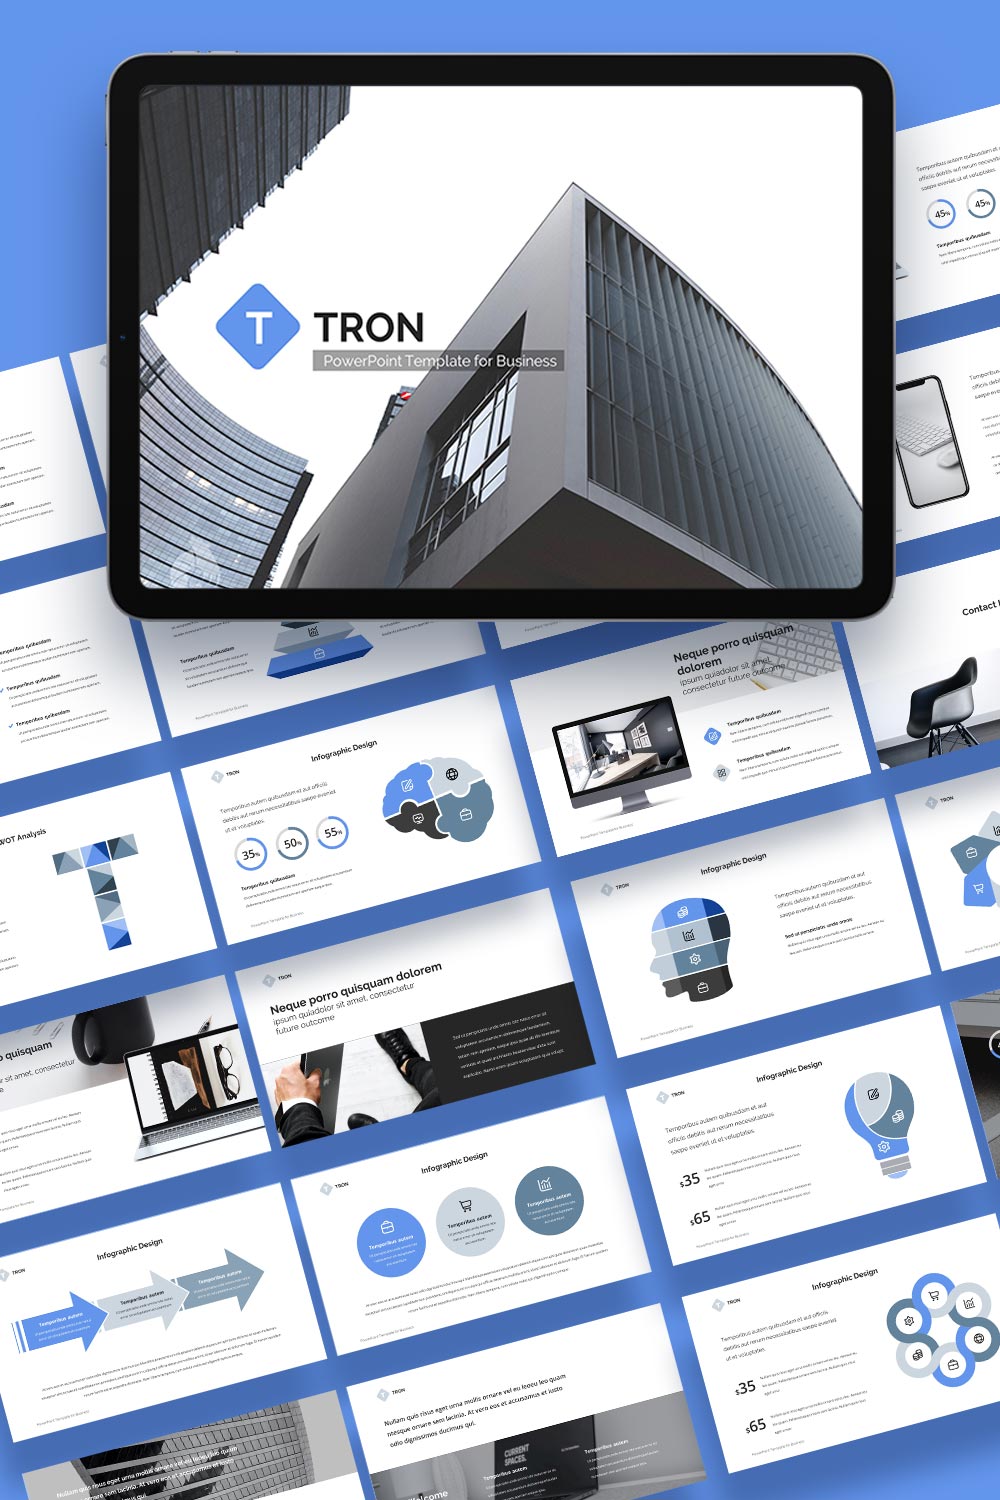 TRON - PowerPoint Presentation for Business pinterest image.